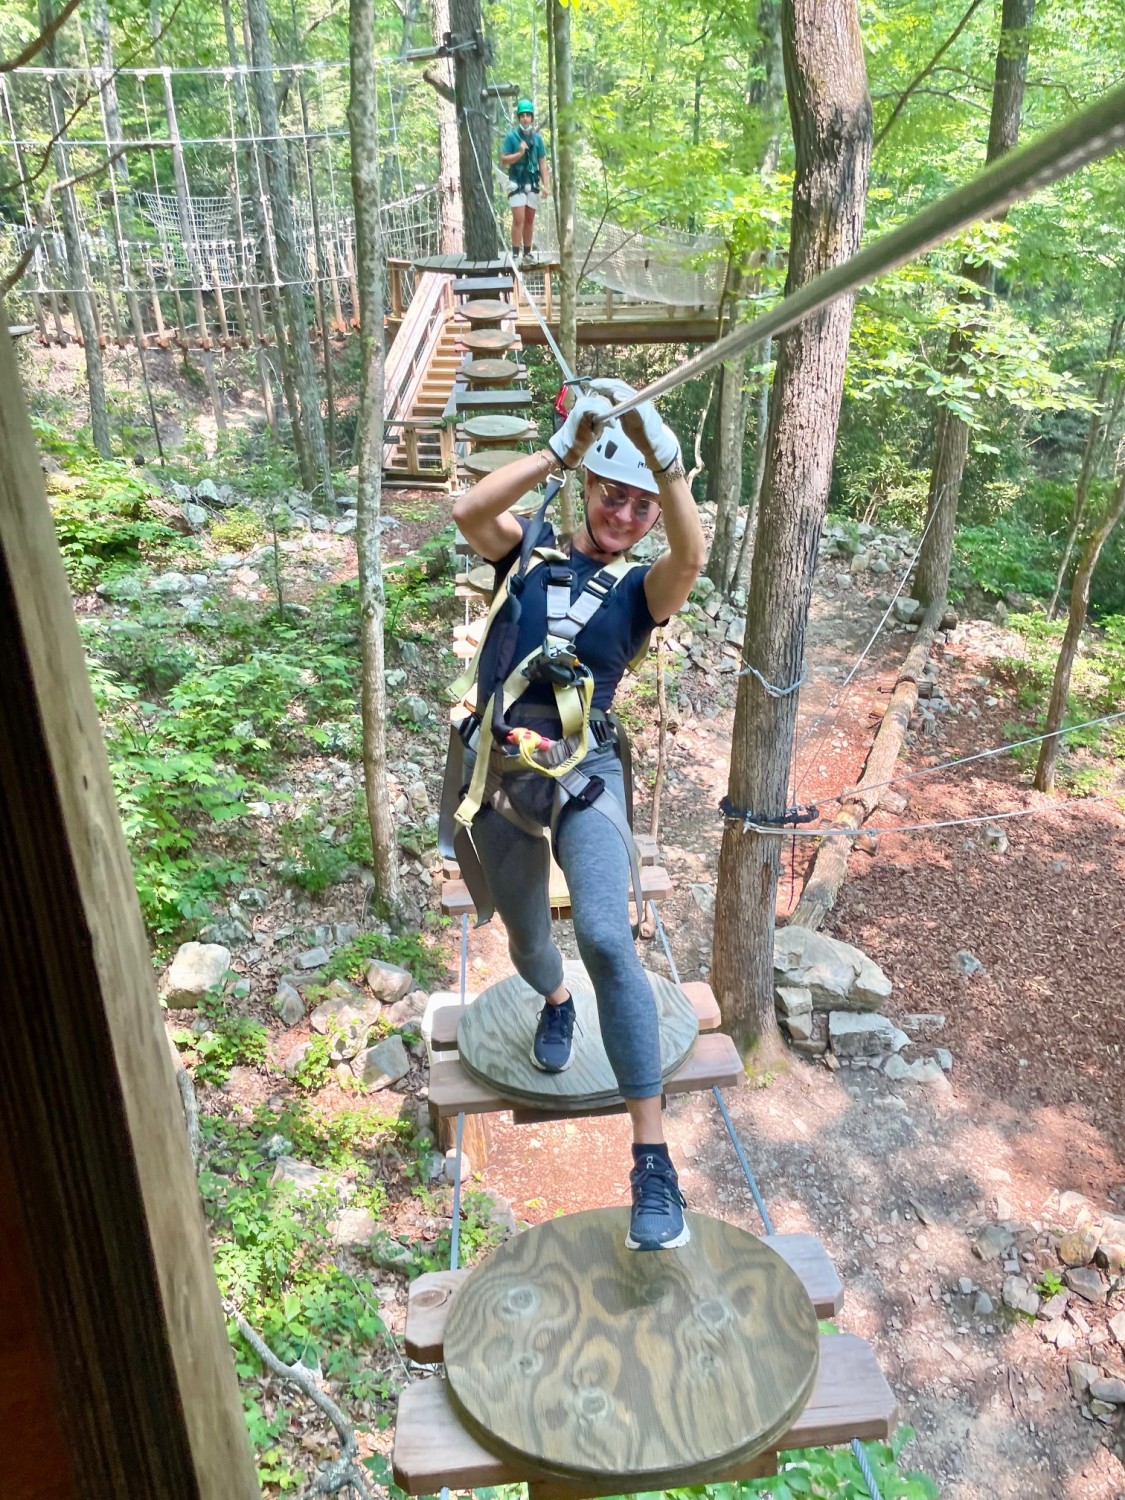 A person zip-lining through the forest with gear and ropes tied to them. 